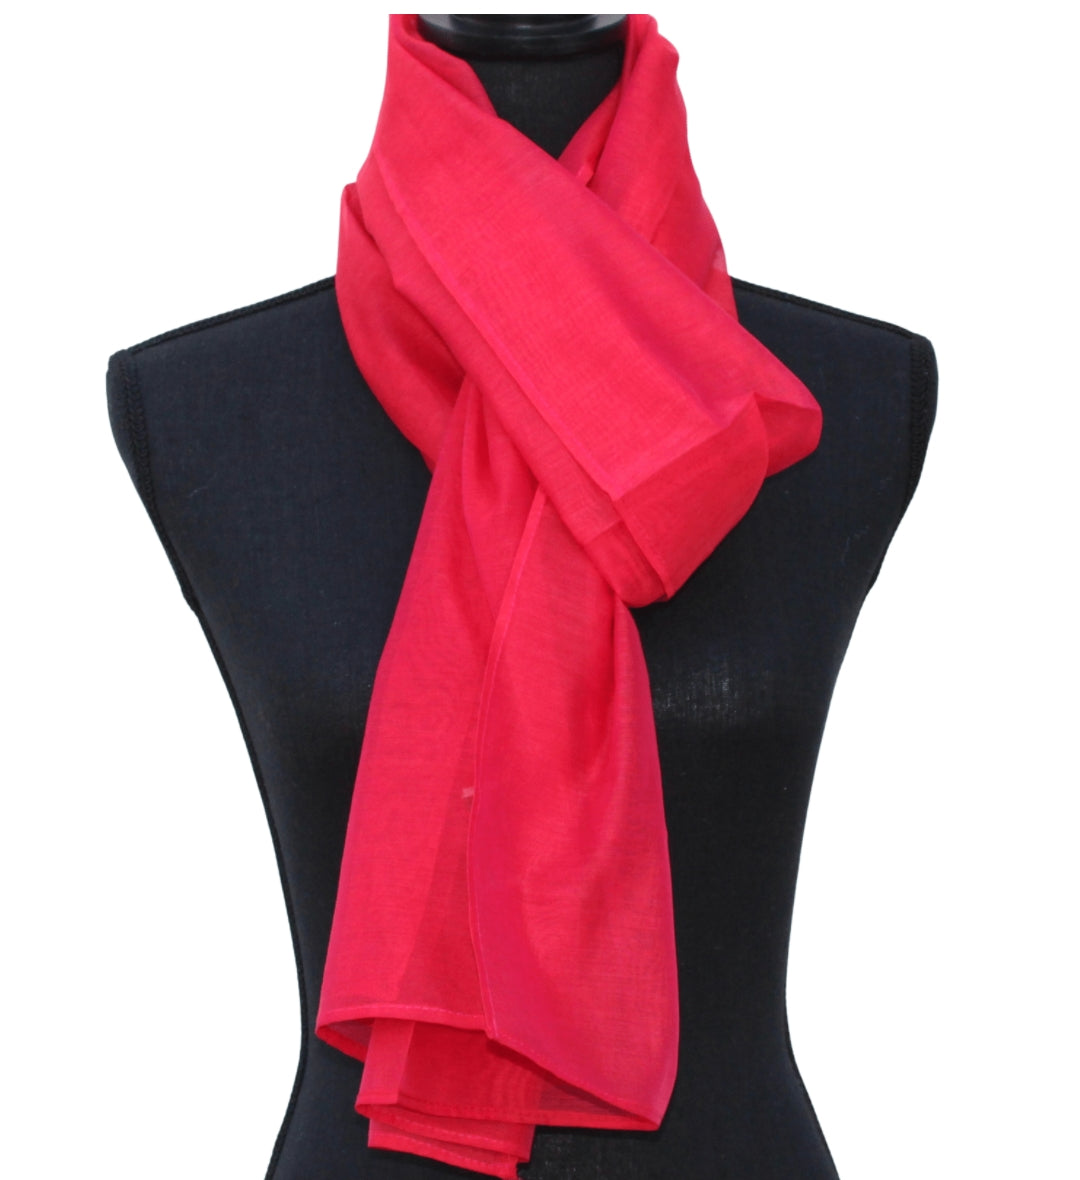 The Upcycled Scarf - Solid colors